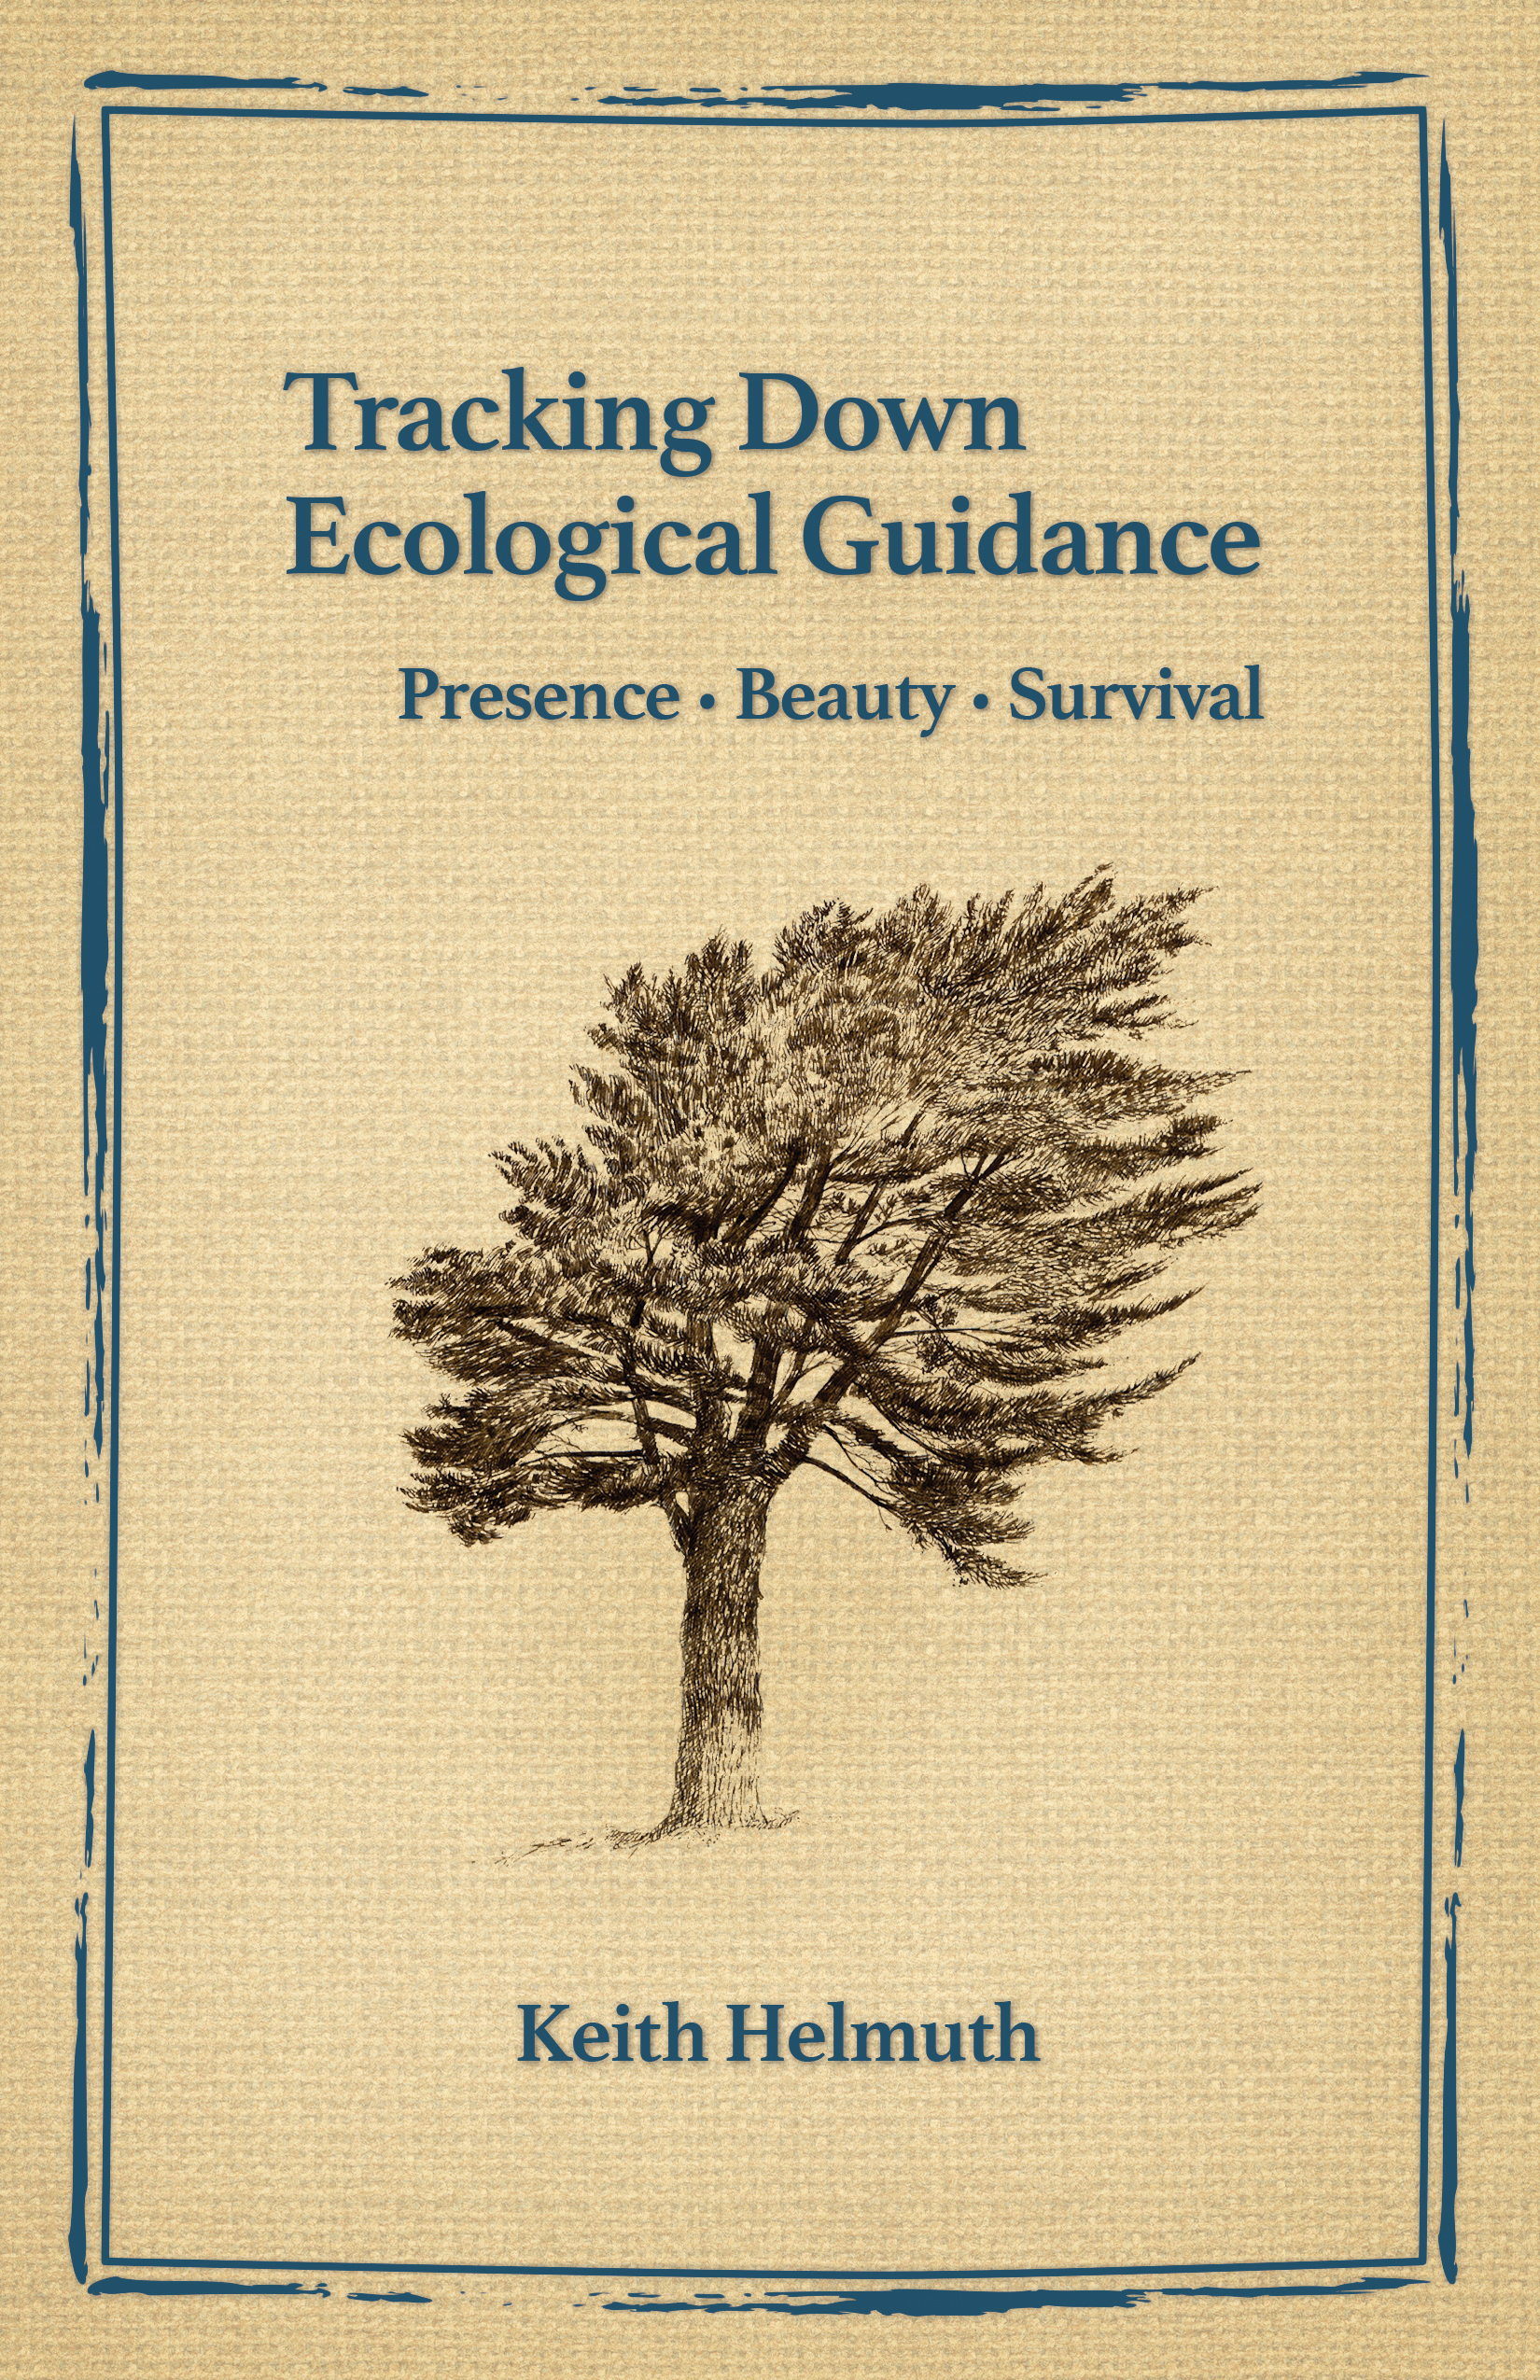 Tracking Down Ecological Guidance